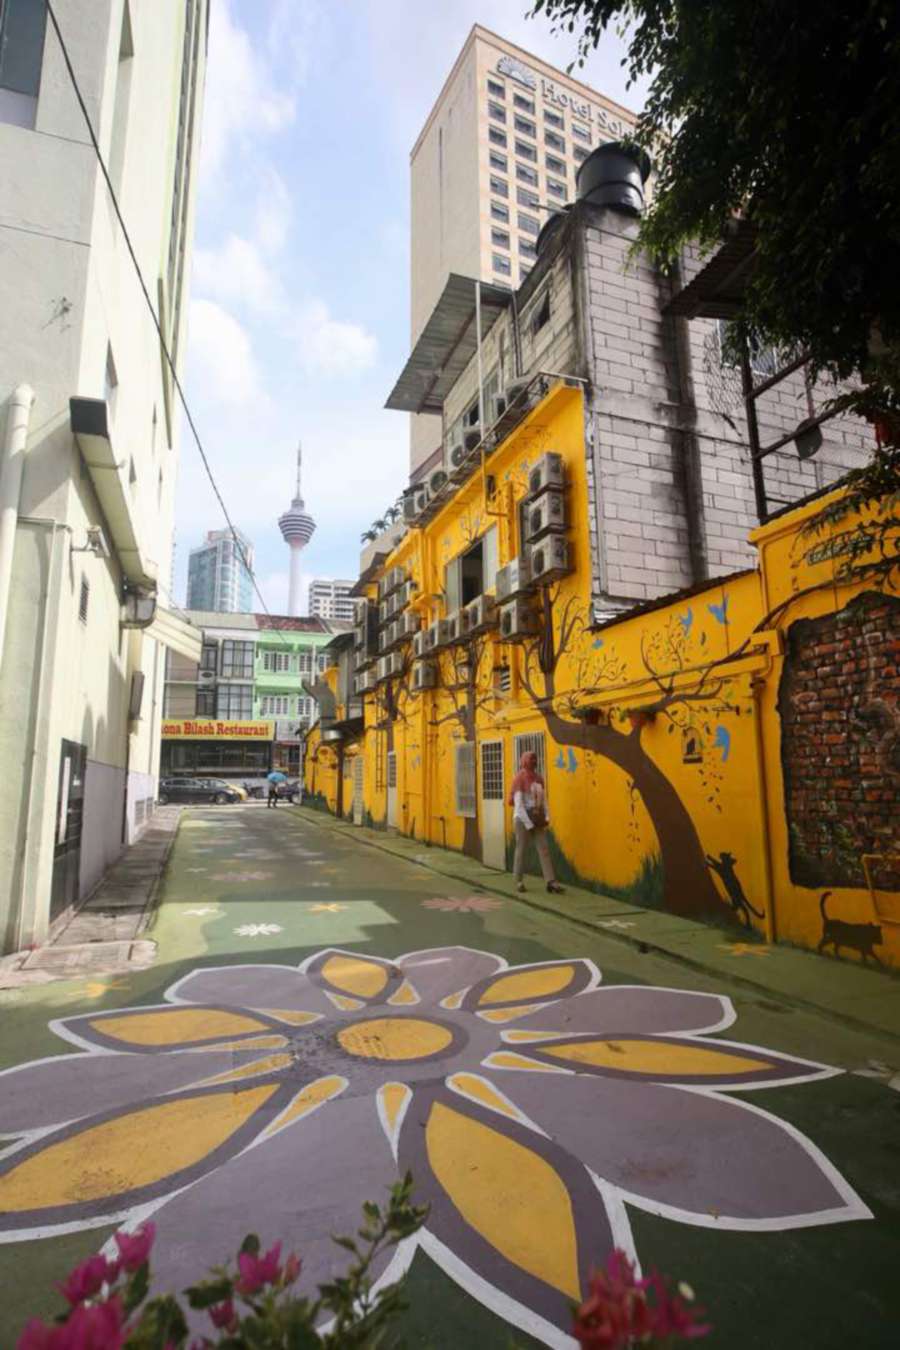 Artists under contract have the chance to express their art work on the walls along the laneways. Pix by Nur Adibah Ahmad Izam